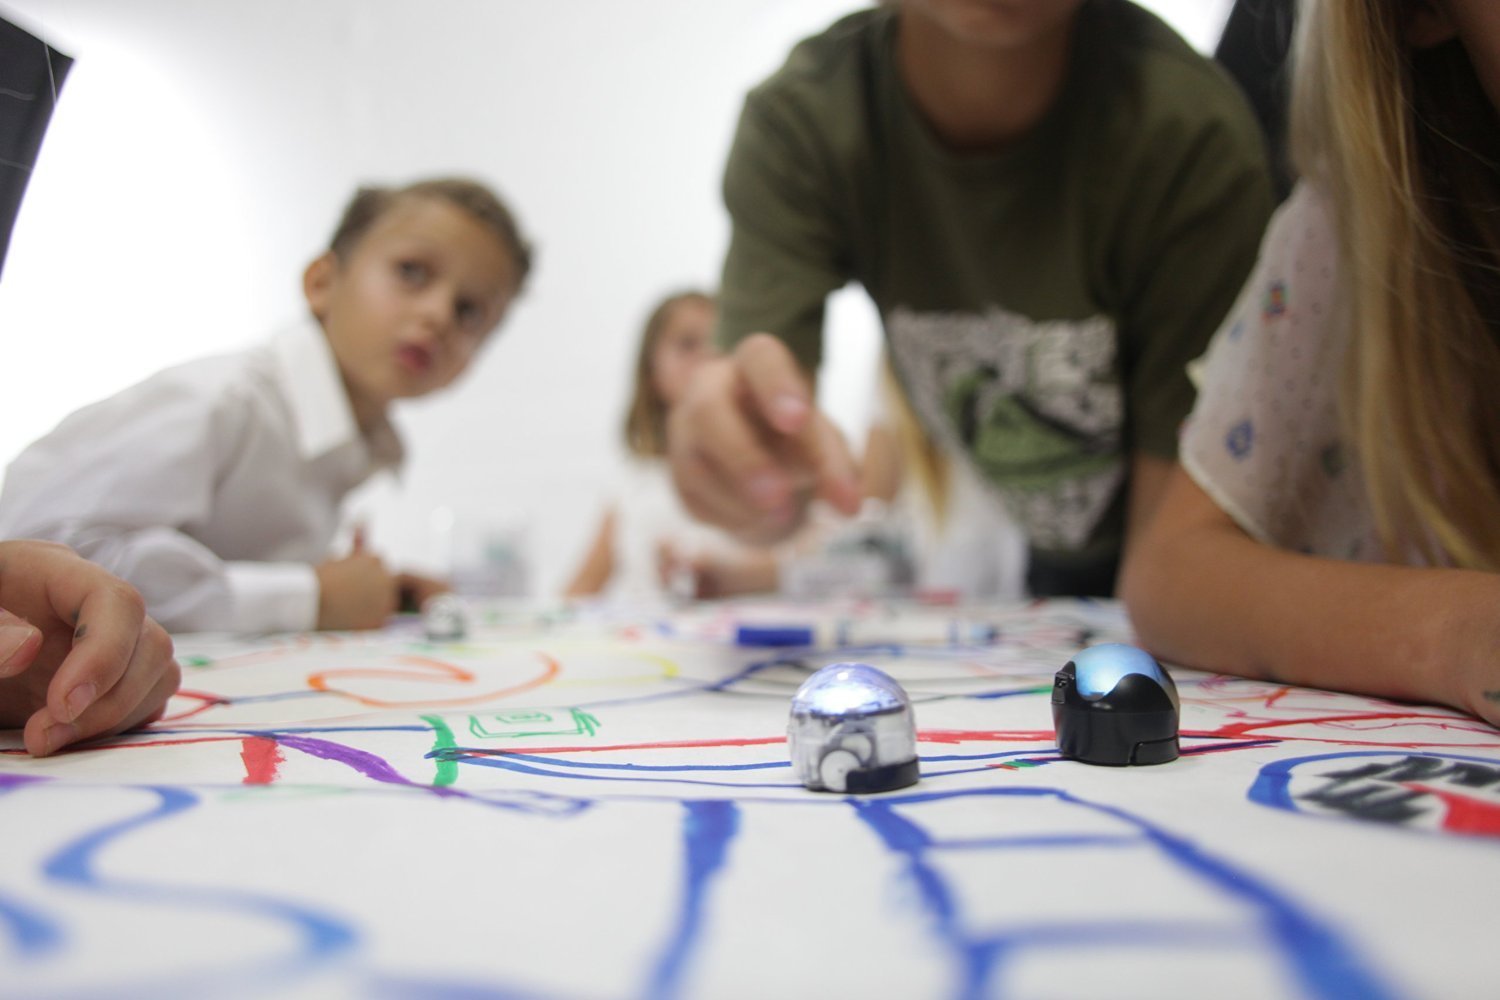 The Ozobot Evo is a Cute Robot that Teaches Kids How to Code